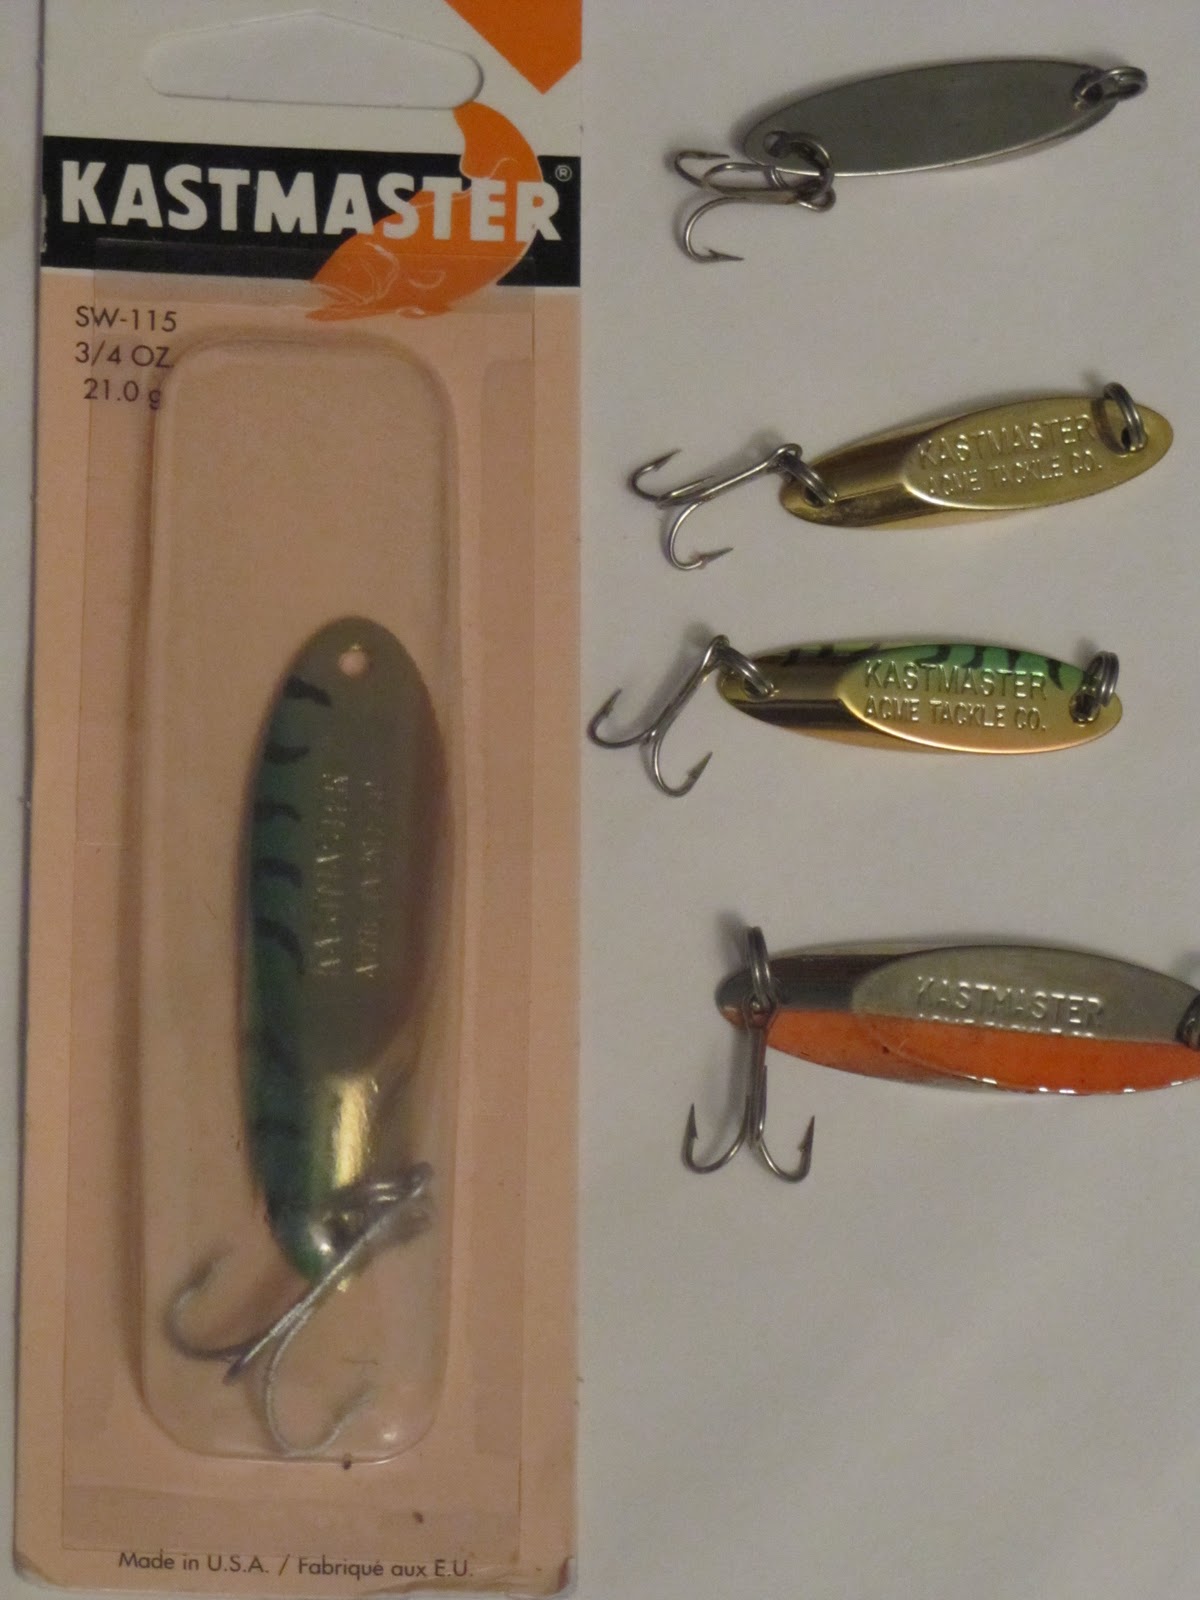 Southern New England Outdoor and Nature Site: Product Review- Kastmaster